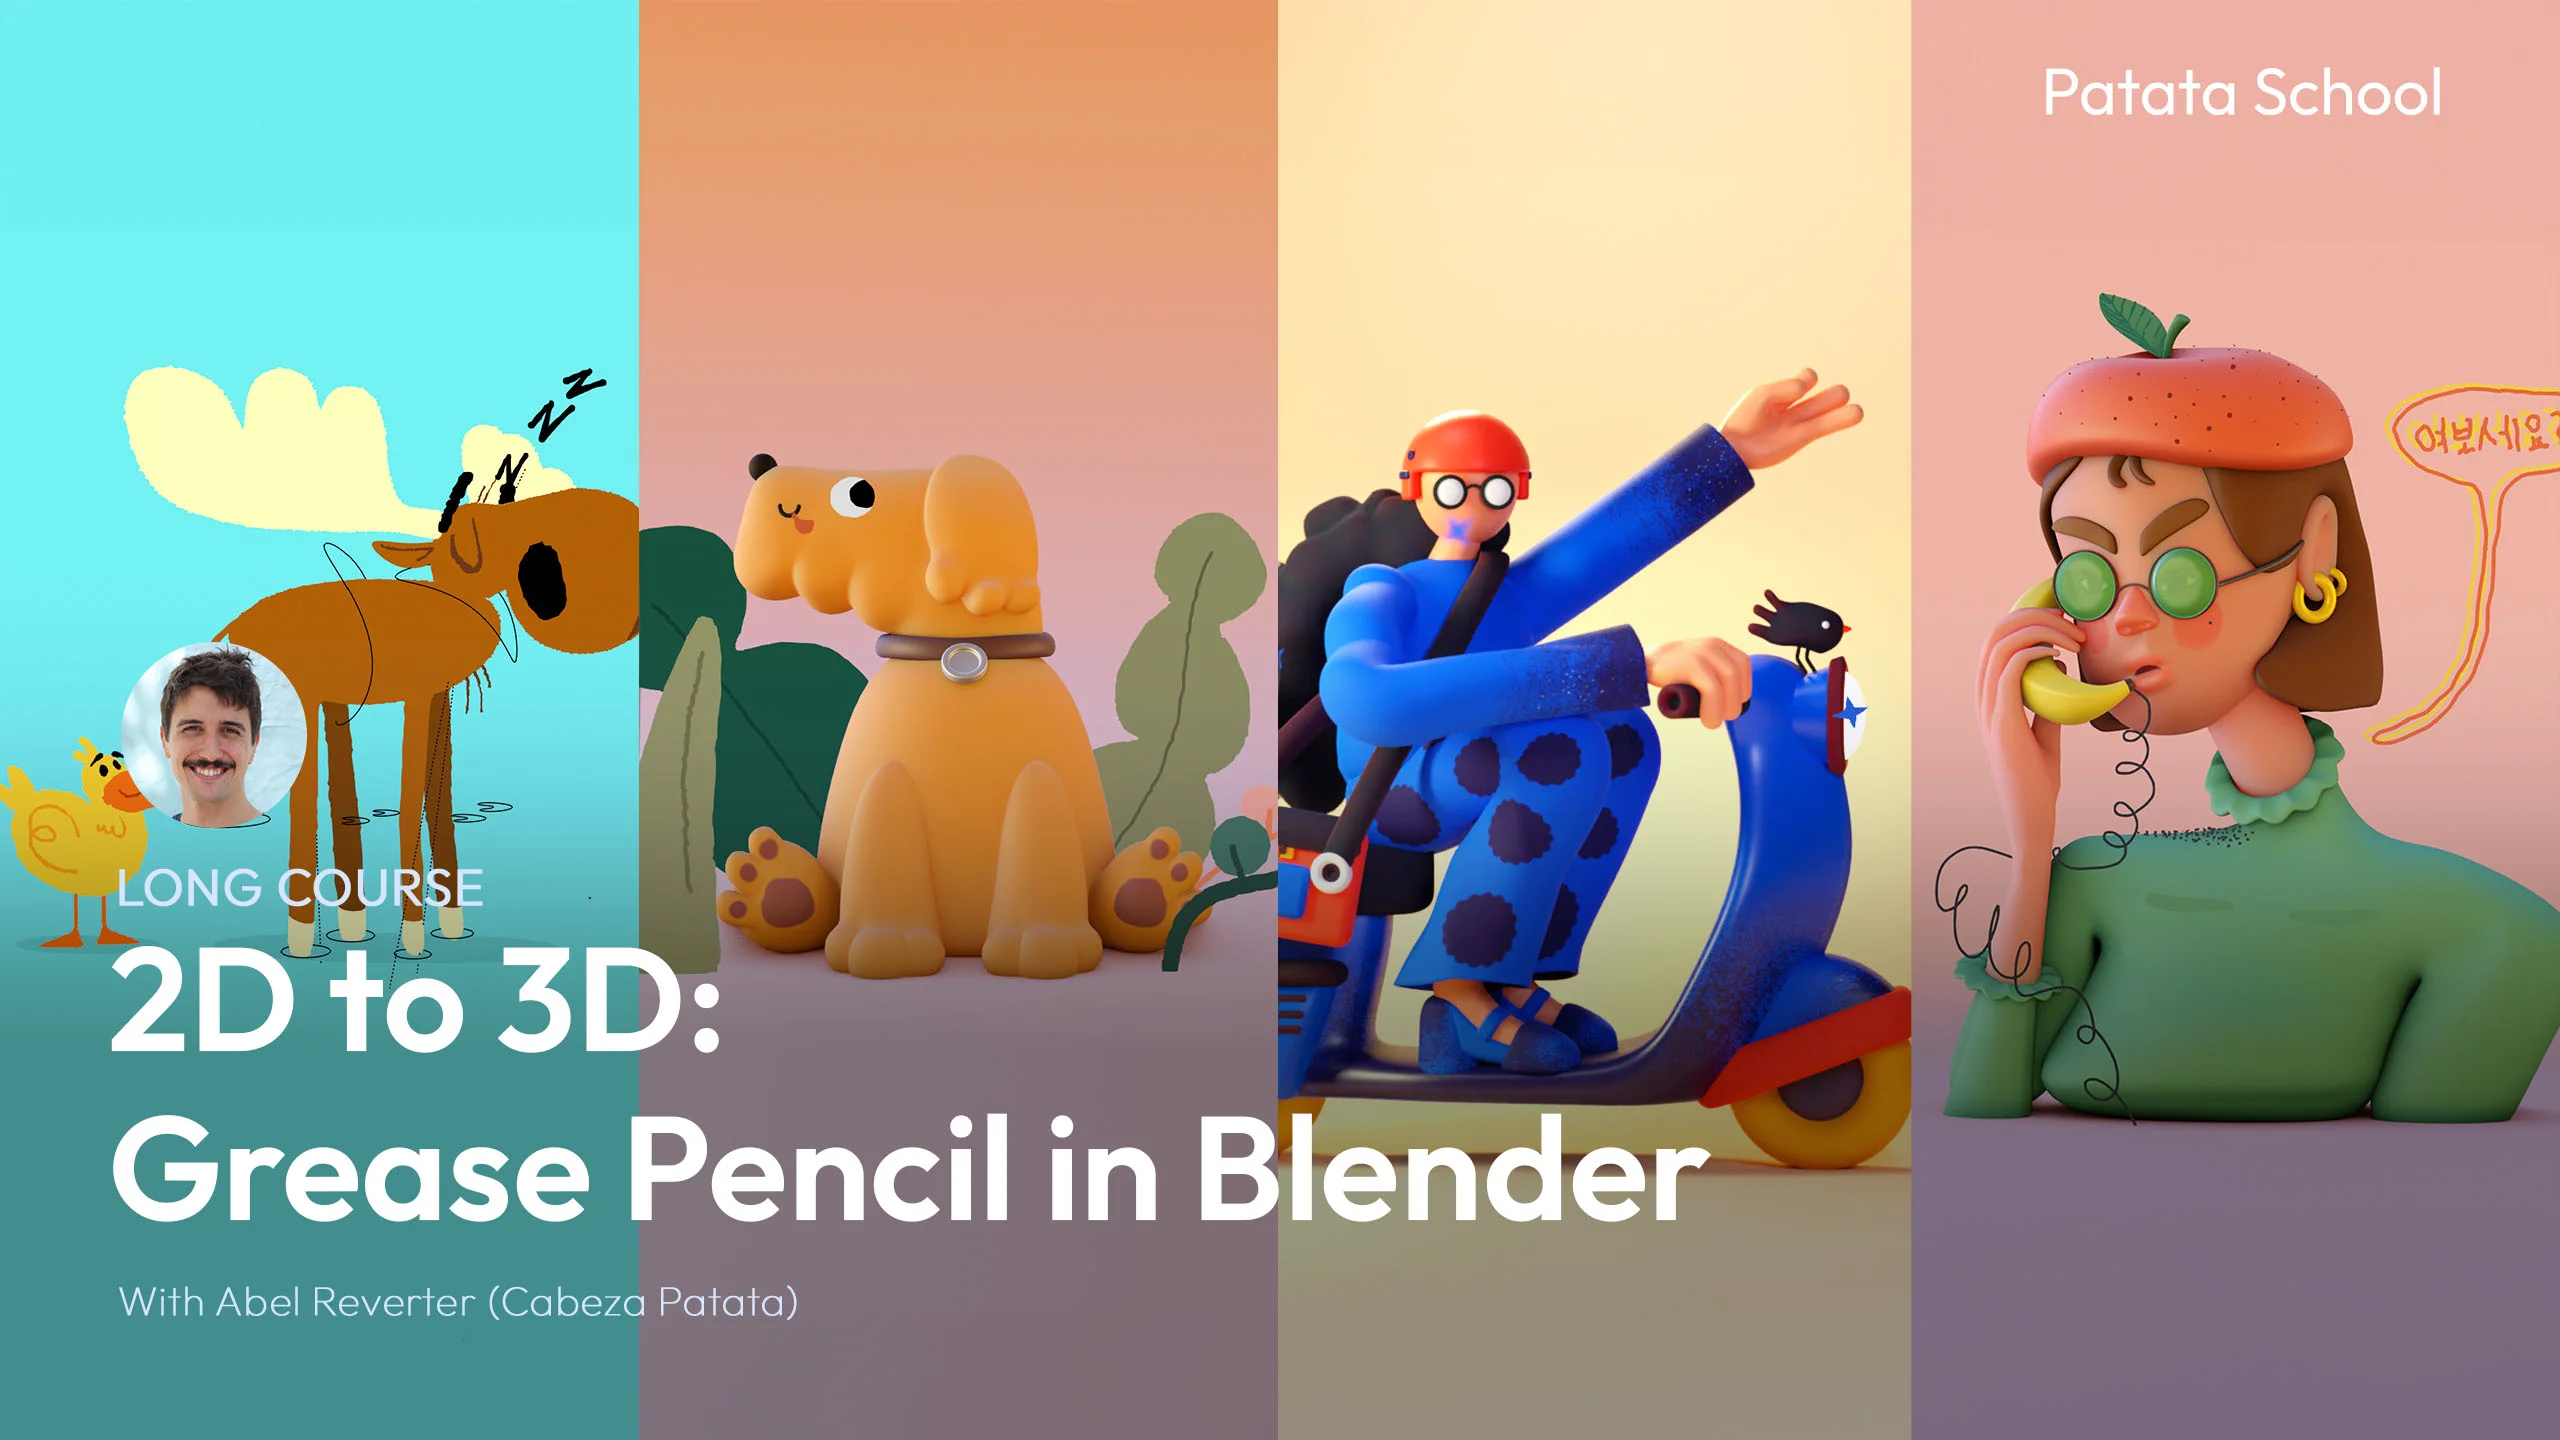 2D to 3D: Grease Pencil in Blender - Trailer on Vimeo